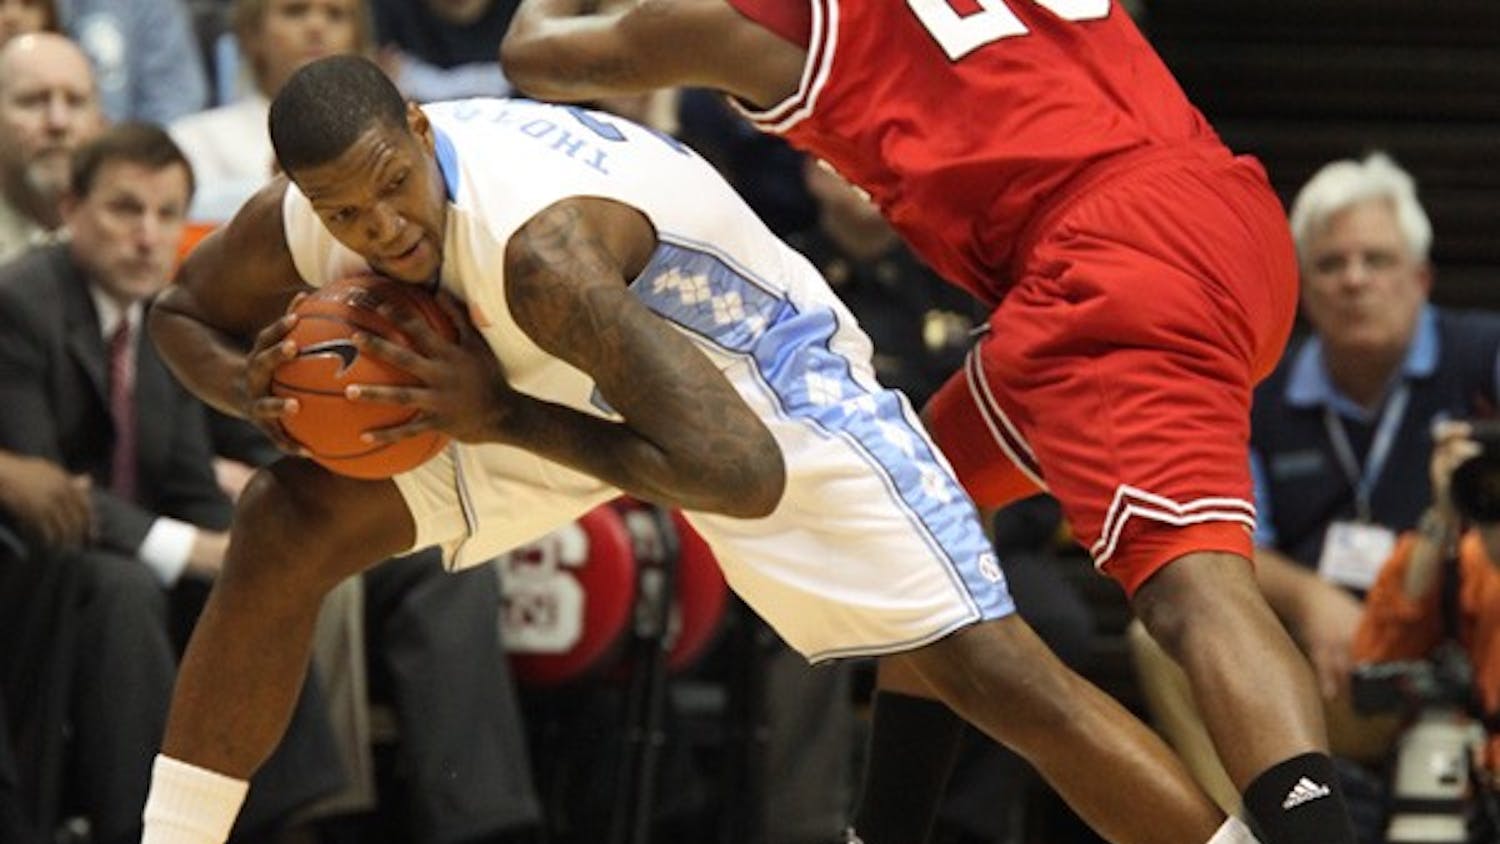 North Carolina senior forward Deon Thompson has suffered two losses in Madison Square Garden. DTH/ Phong Dinh